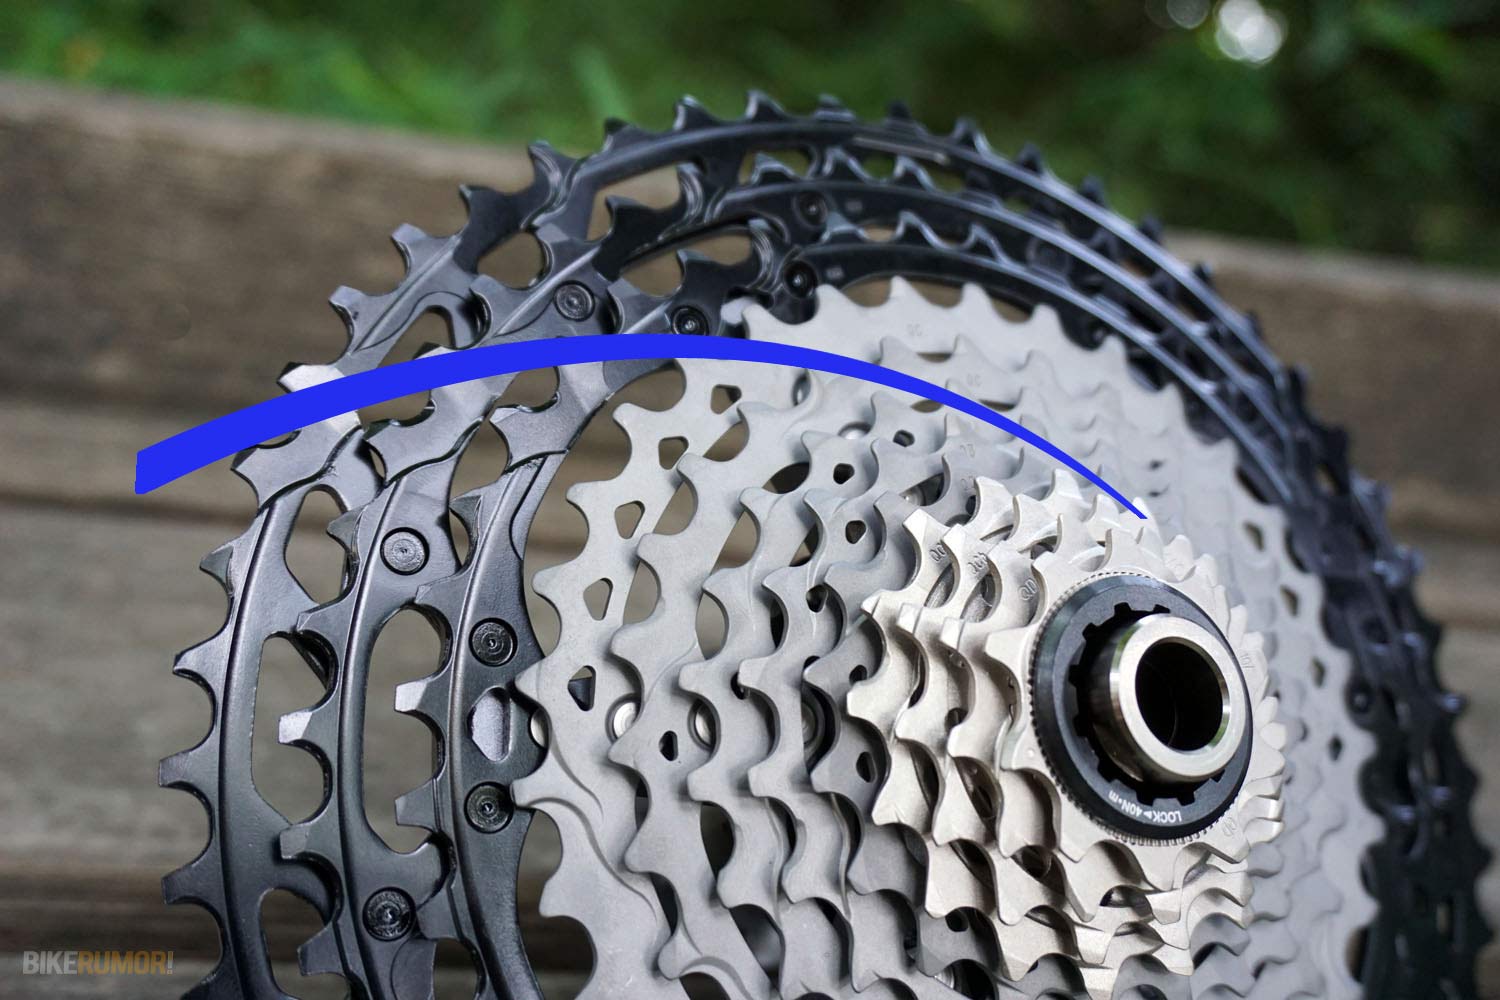 2019 Shimano XTR M9100 cassette and chain tech details with explanation of what is Shimano Hyperglide+